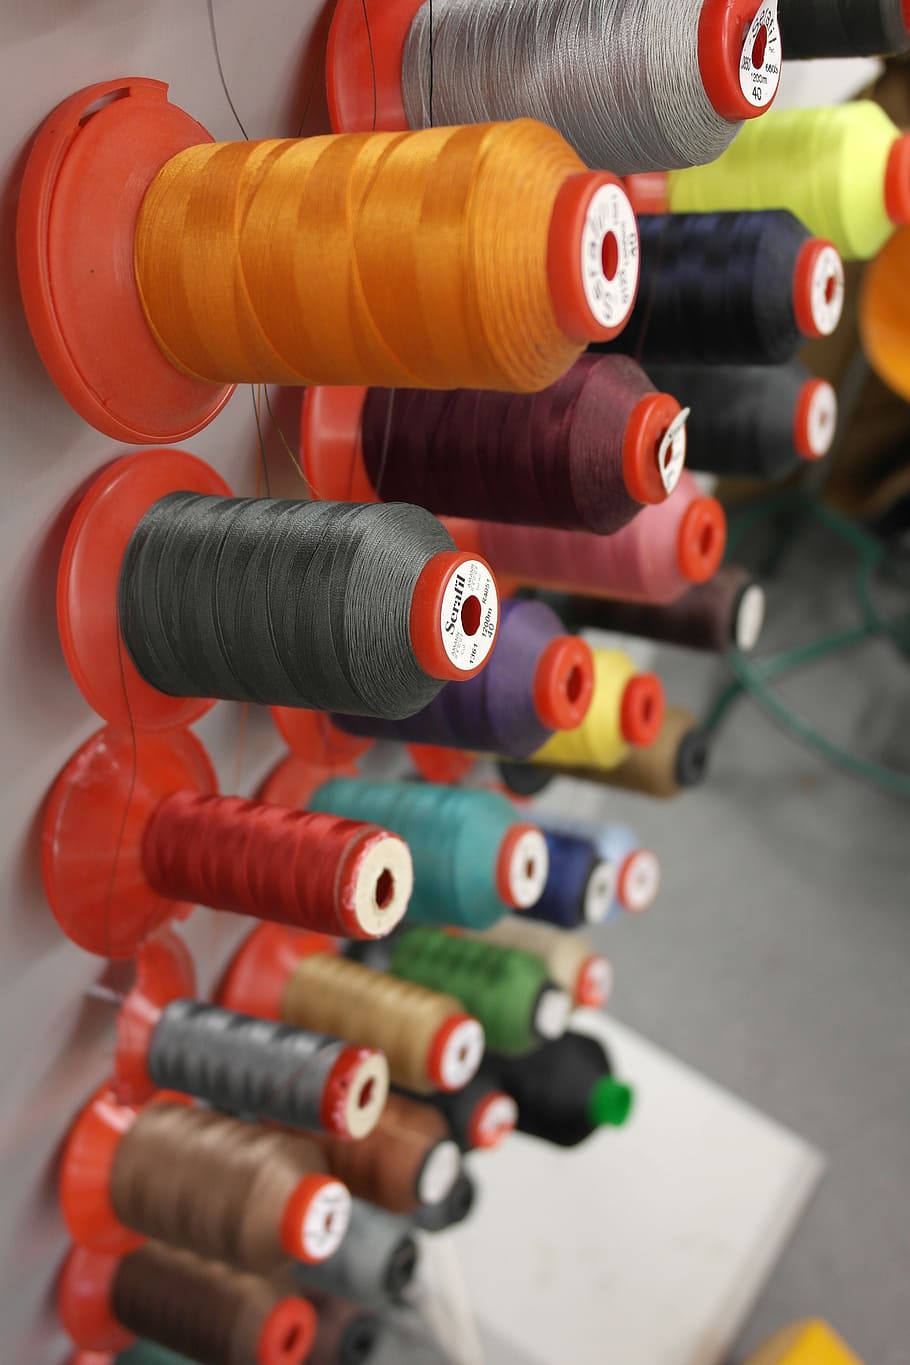 Loose Ends, Threads, Seamstress, the threads, s, a seamstress, sewing, multi colored, large group of objects, variation